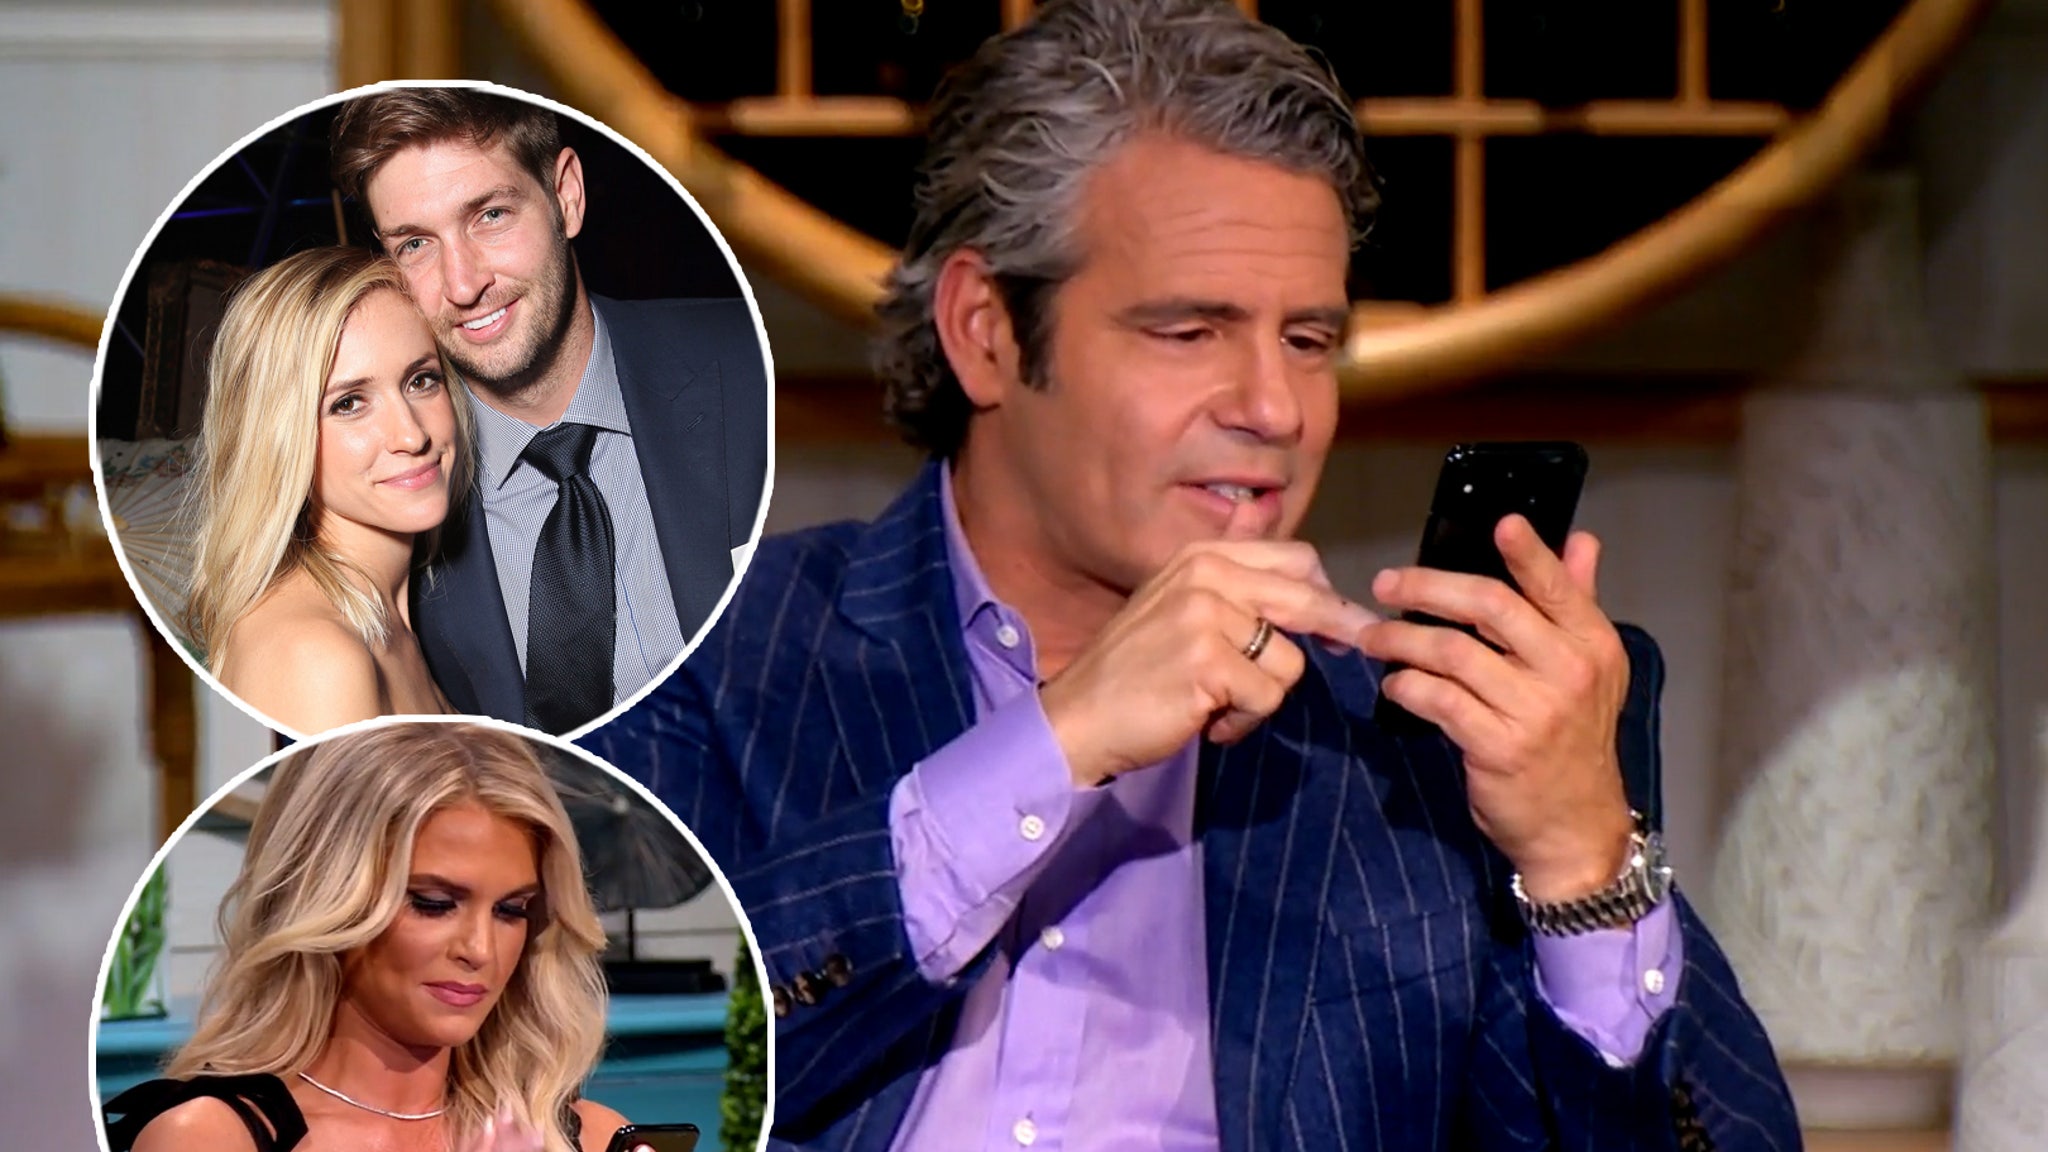 Southern Charm’s Madison LeCroy exposes alleged Jay Cutler texts during the meeting